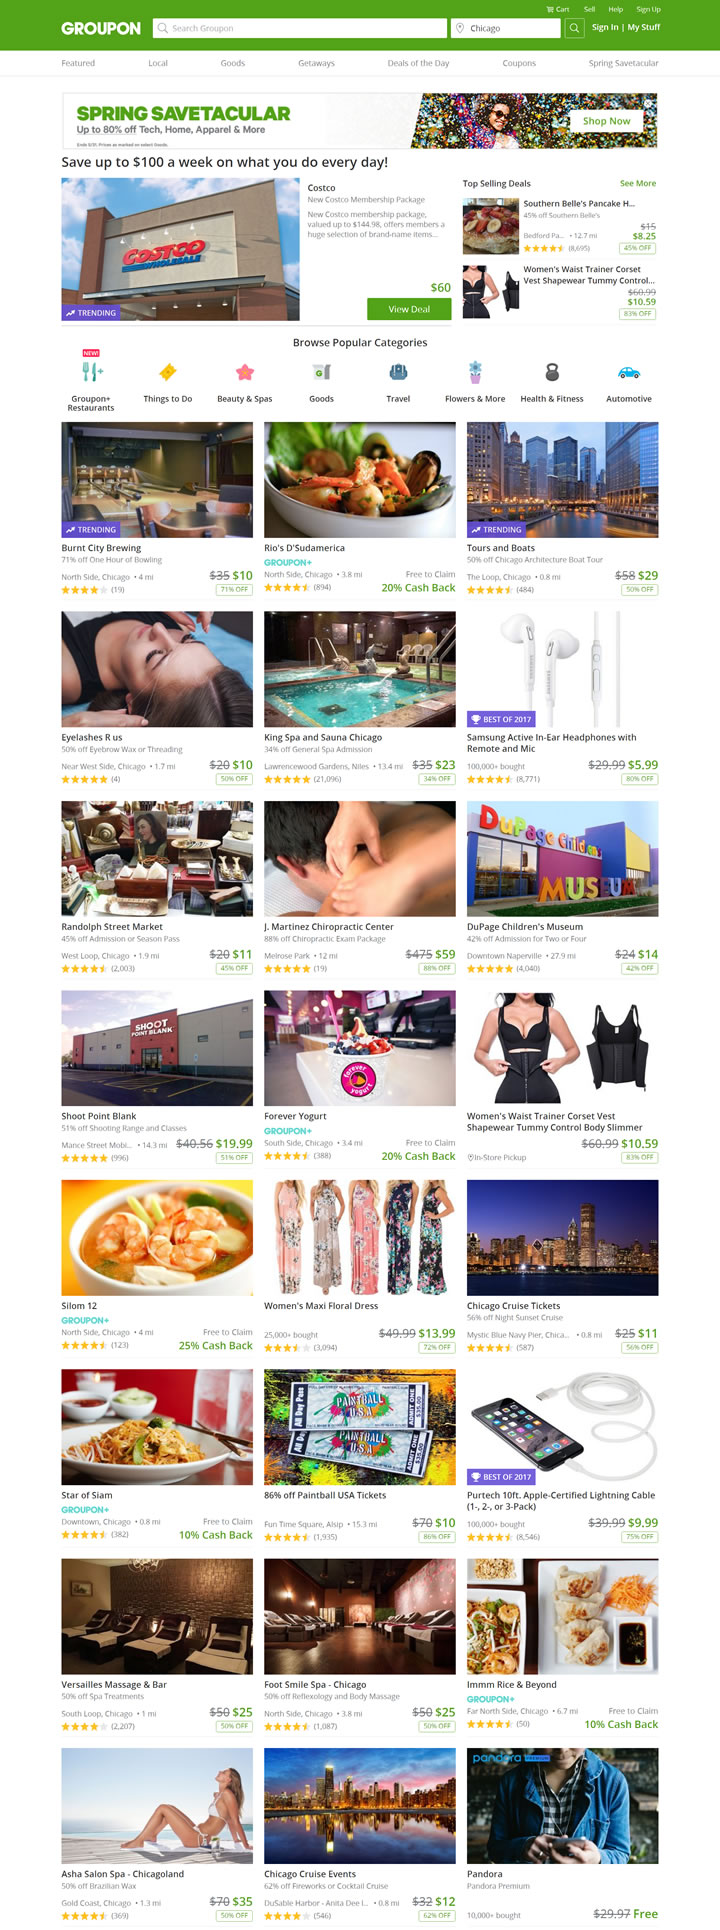 US Deals and Coupons Site: Groupon